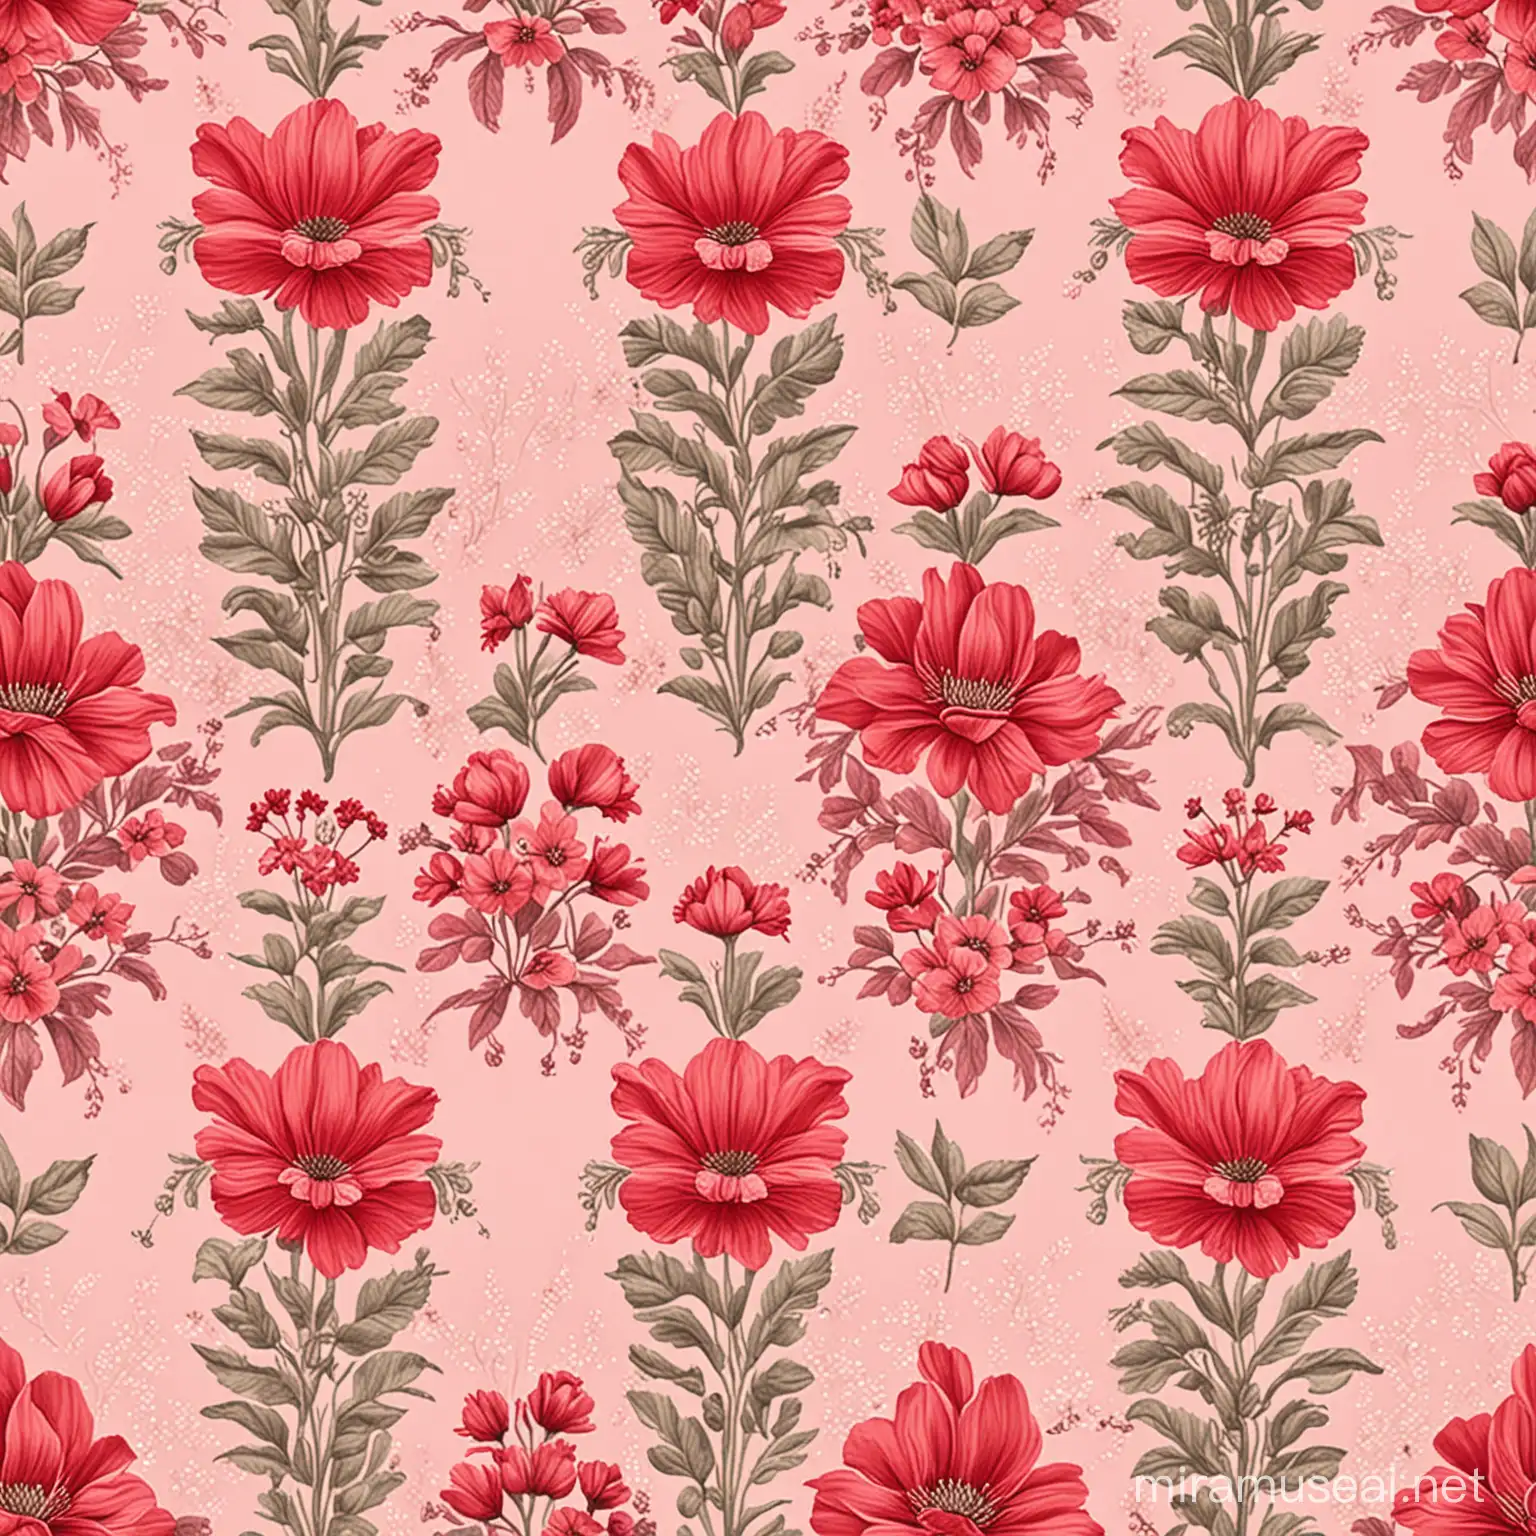 Victorian Style Floral Pattern on Pastel Pink Background with Red Flowers